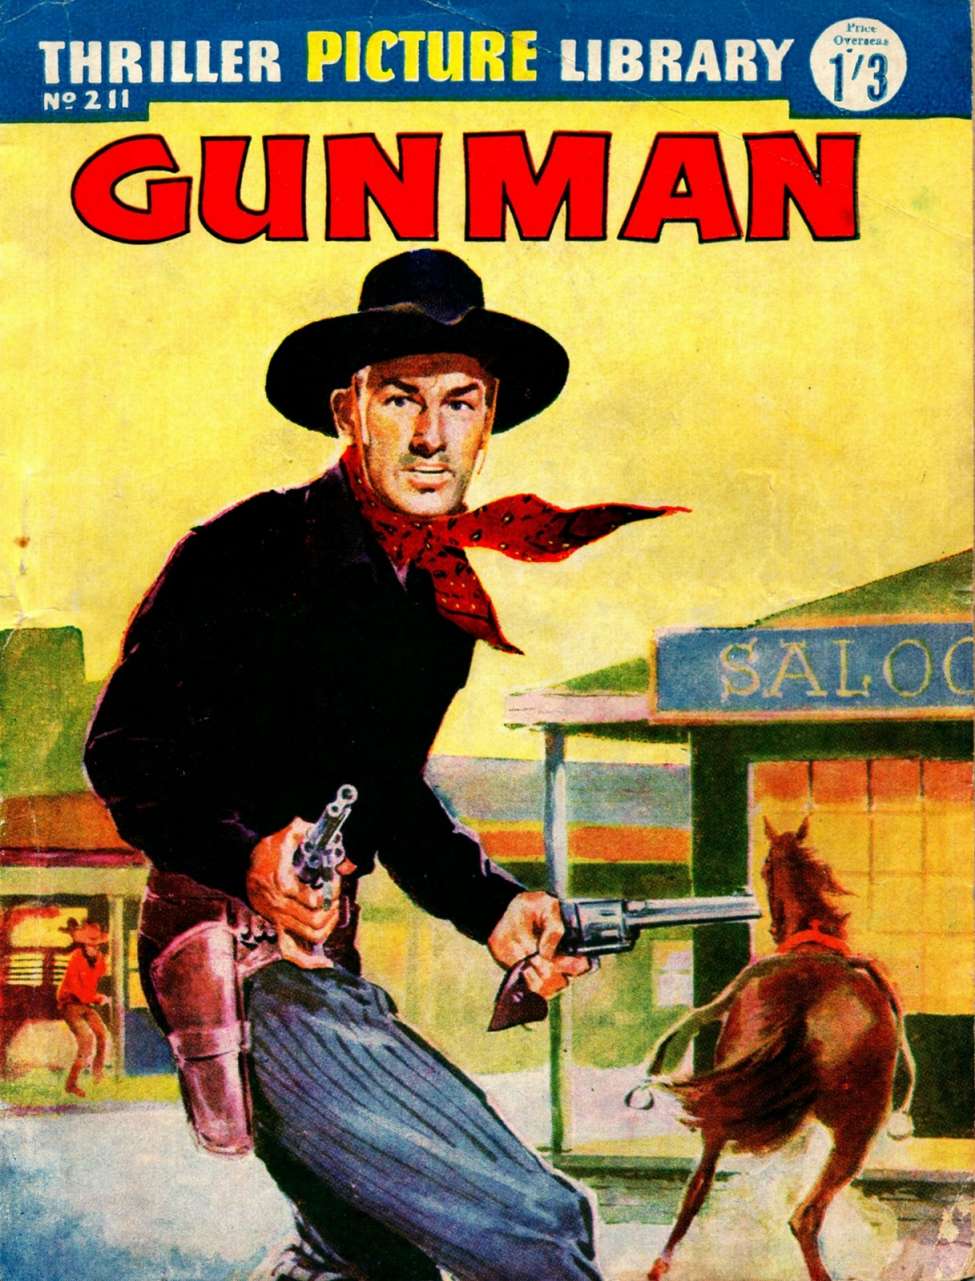 Book Cover For Thriller Picture Library 211 - Gunman